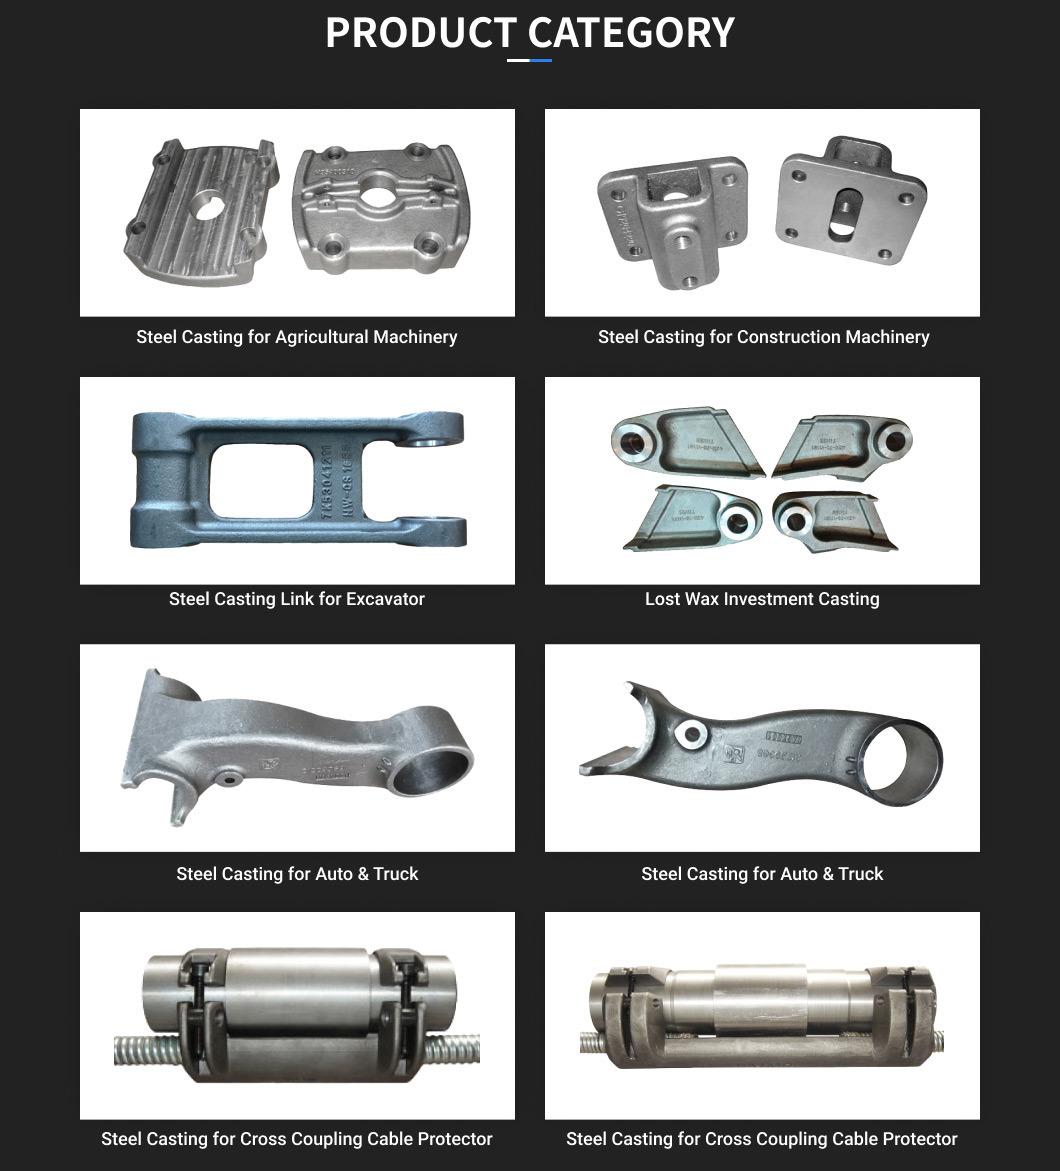 Top Selling Reusable Prototype Casting Machining Parts for Agriculural Machinery Parts